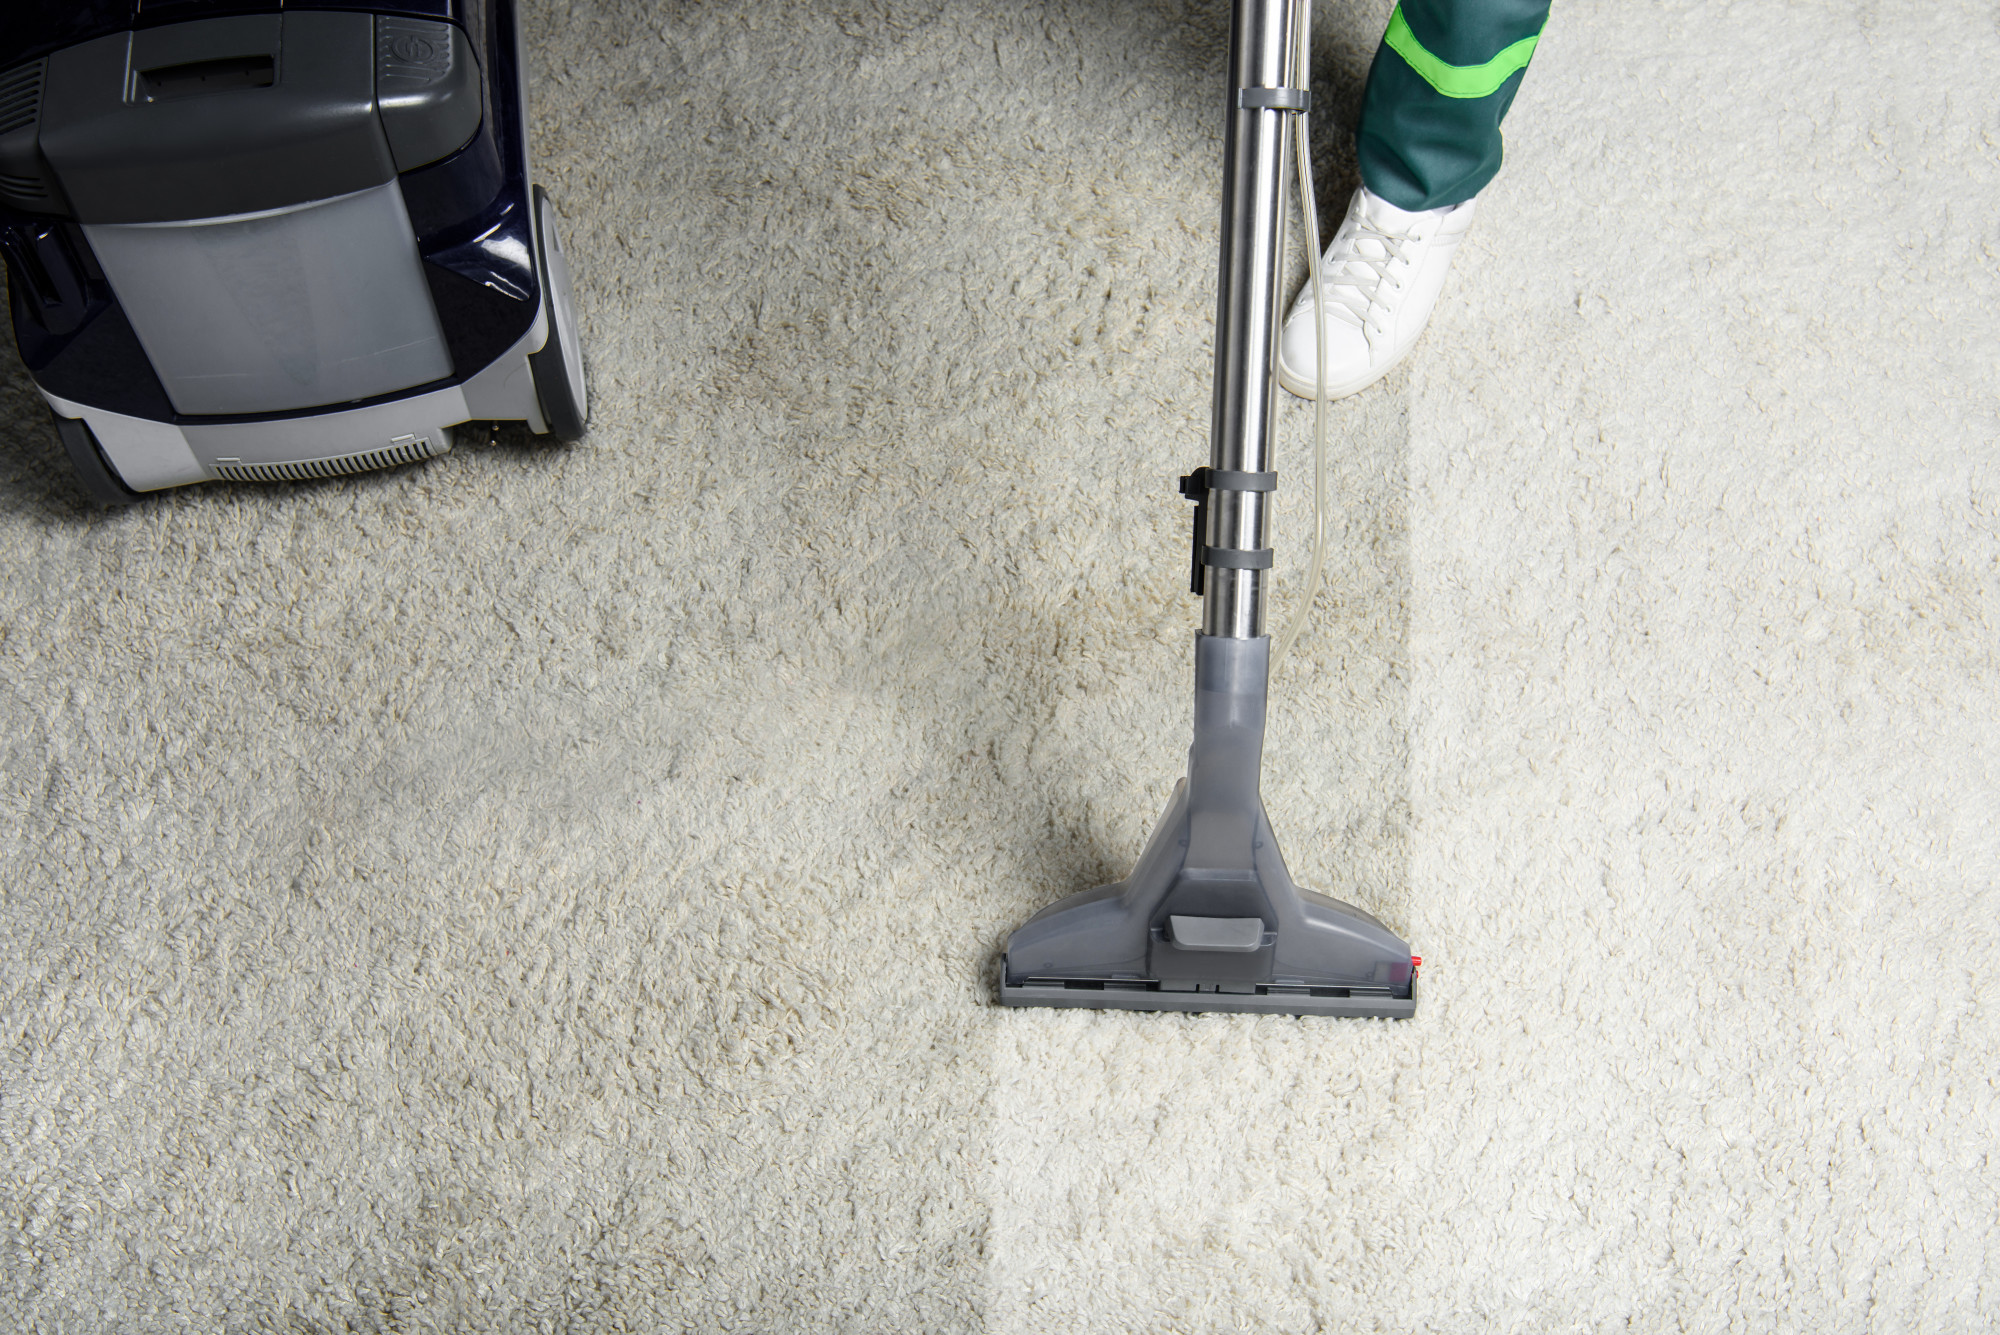 The 5 Best Carpet Cleaning Services In London